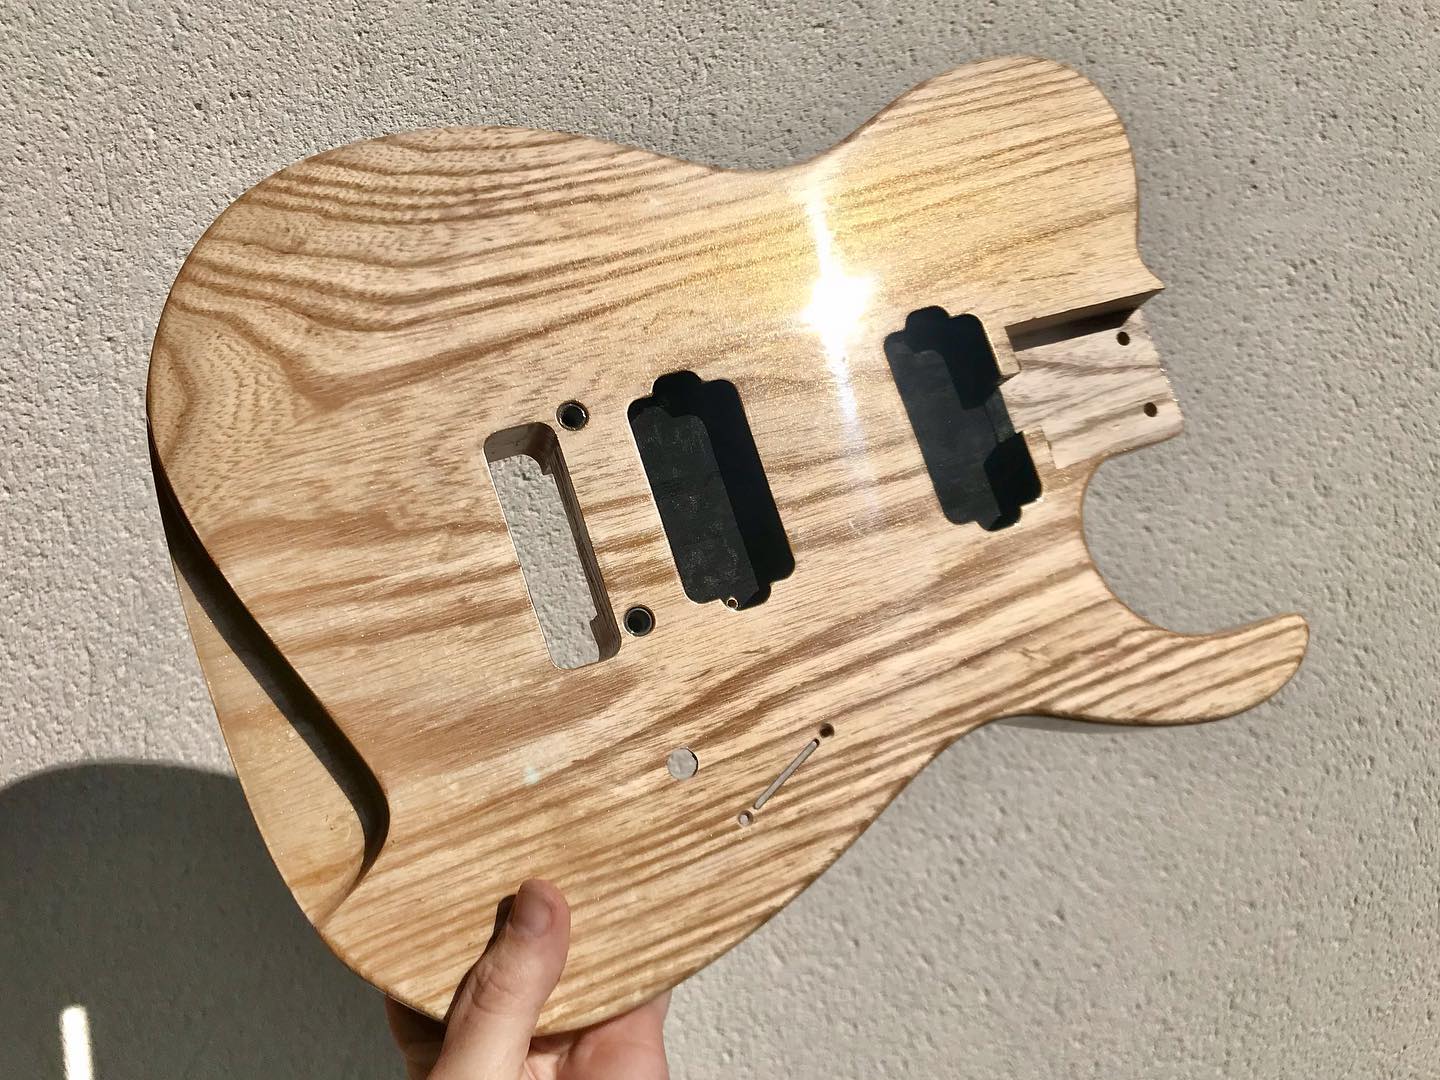 Ready for assembly. 🥰
#guitar #guitare #guitarist #lutherie #luthier #luthierfrance #guitarmaker #guitarmaking #telecaster #supertele #swampash #ghostgoldpearl